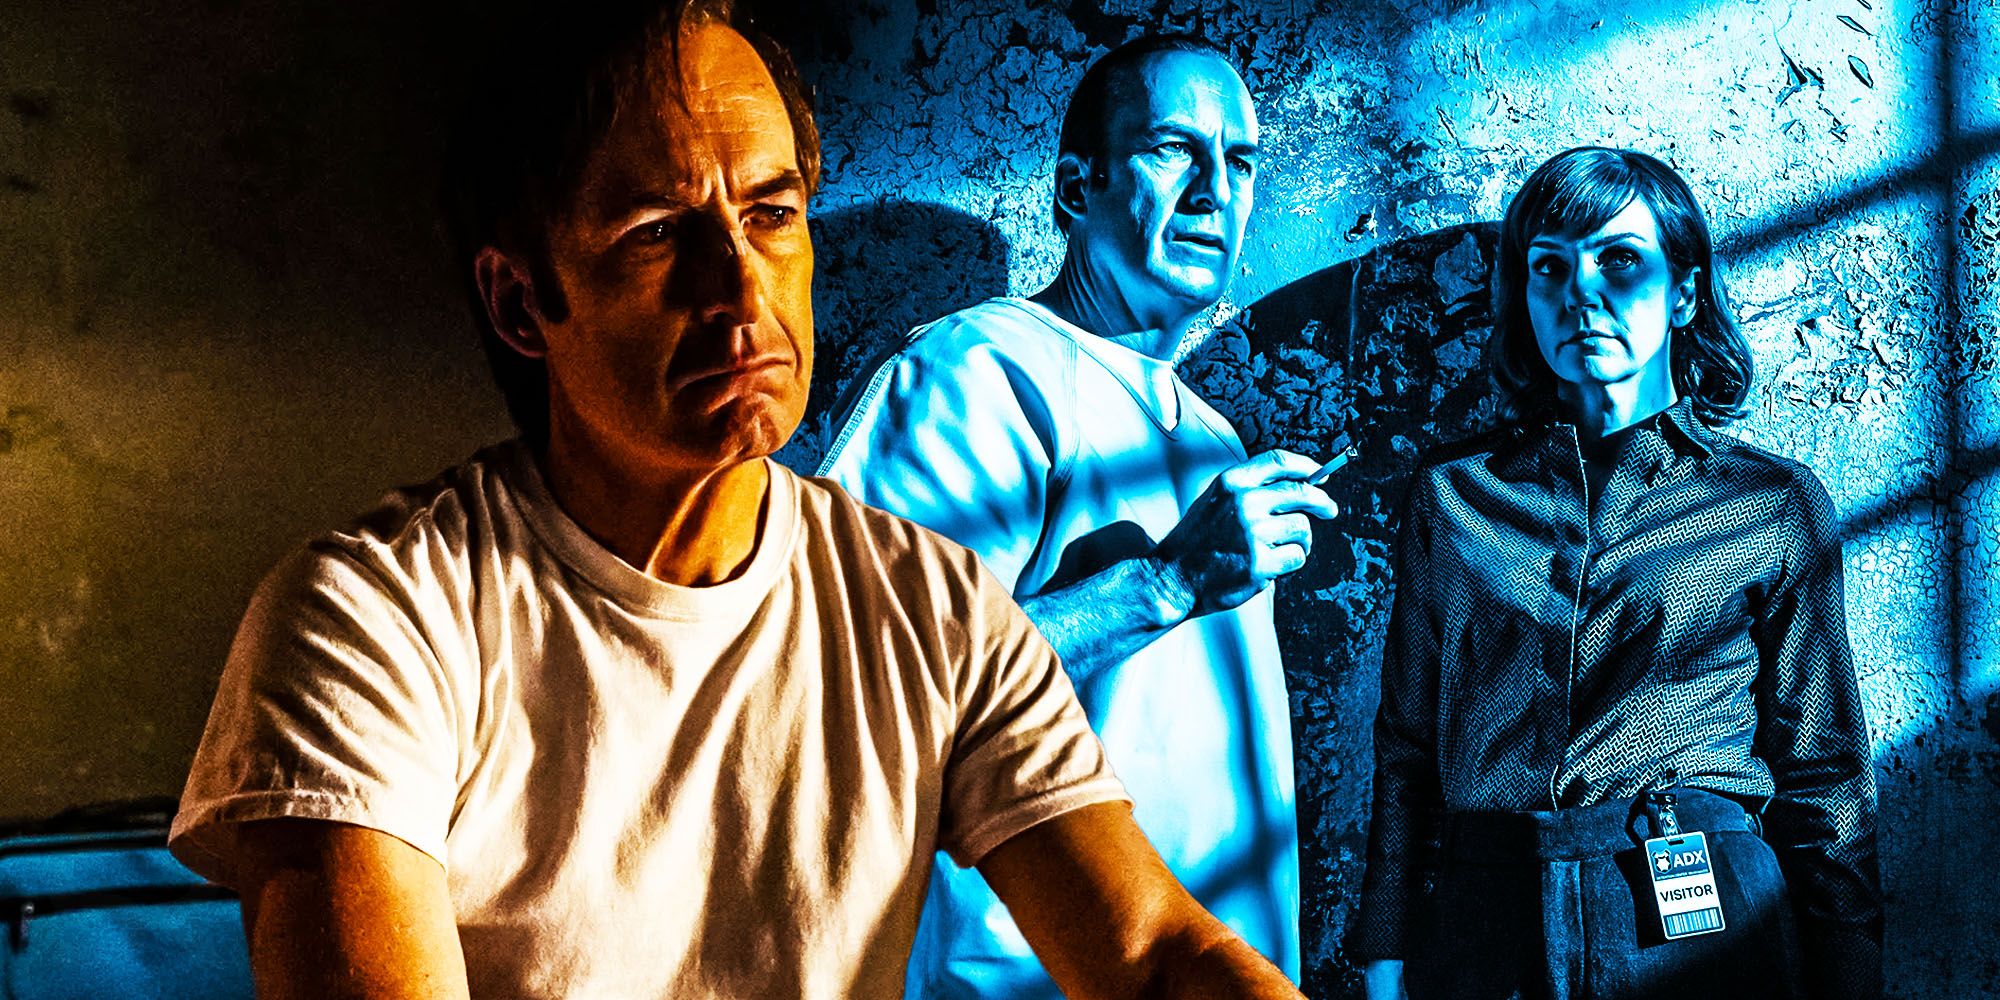 Bob Odenkirk as Jimmy in Better call saul collage with finale shot of kim and jimmy